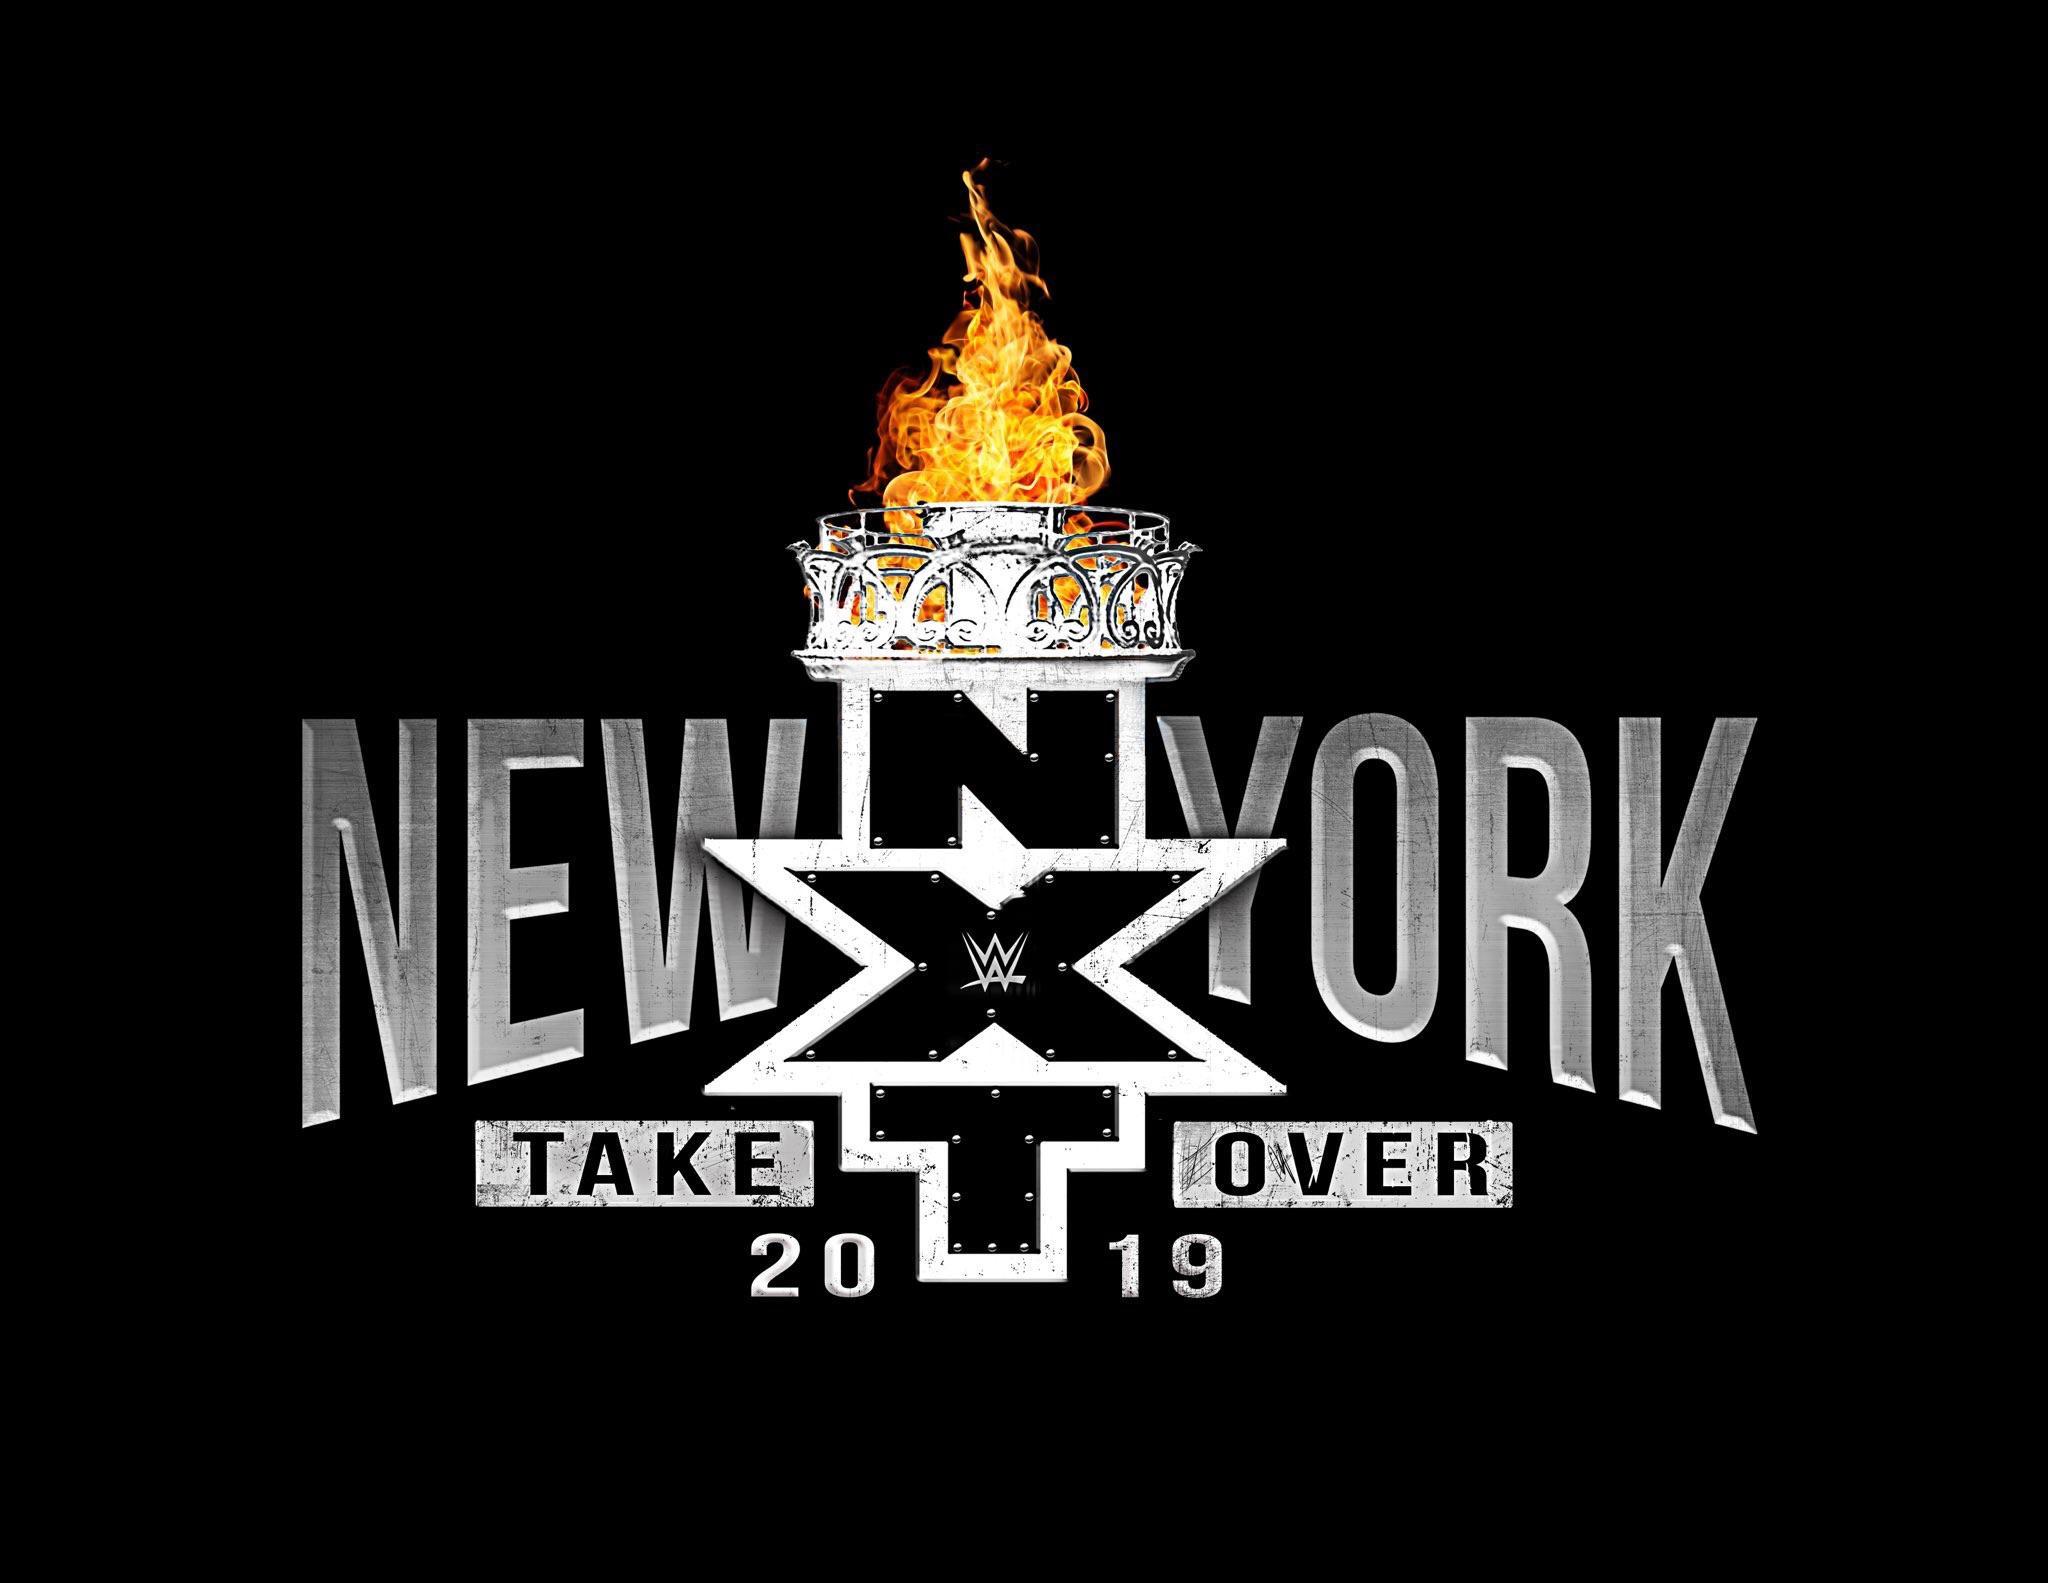 Takeover Logo - The logo for NXT Takeover: New York! : SquaredCircle